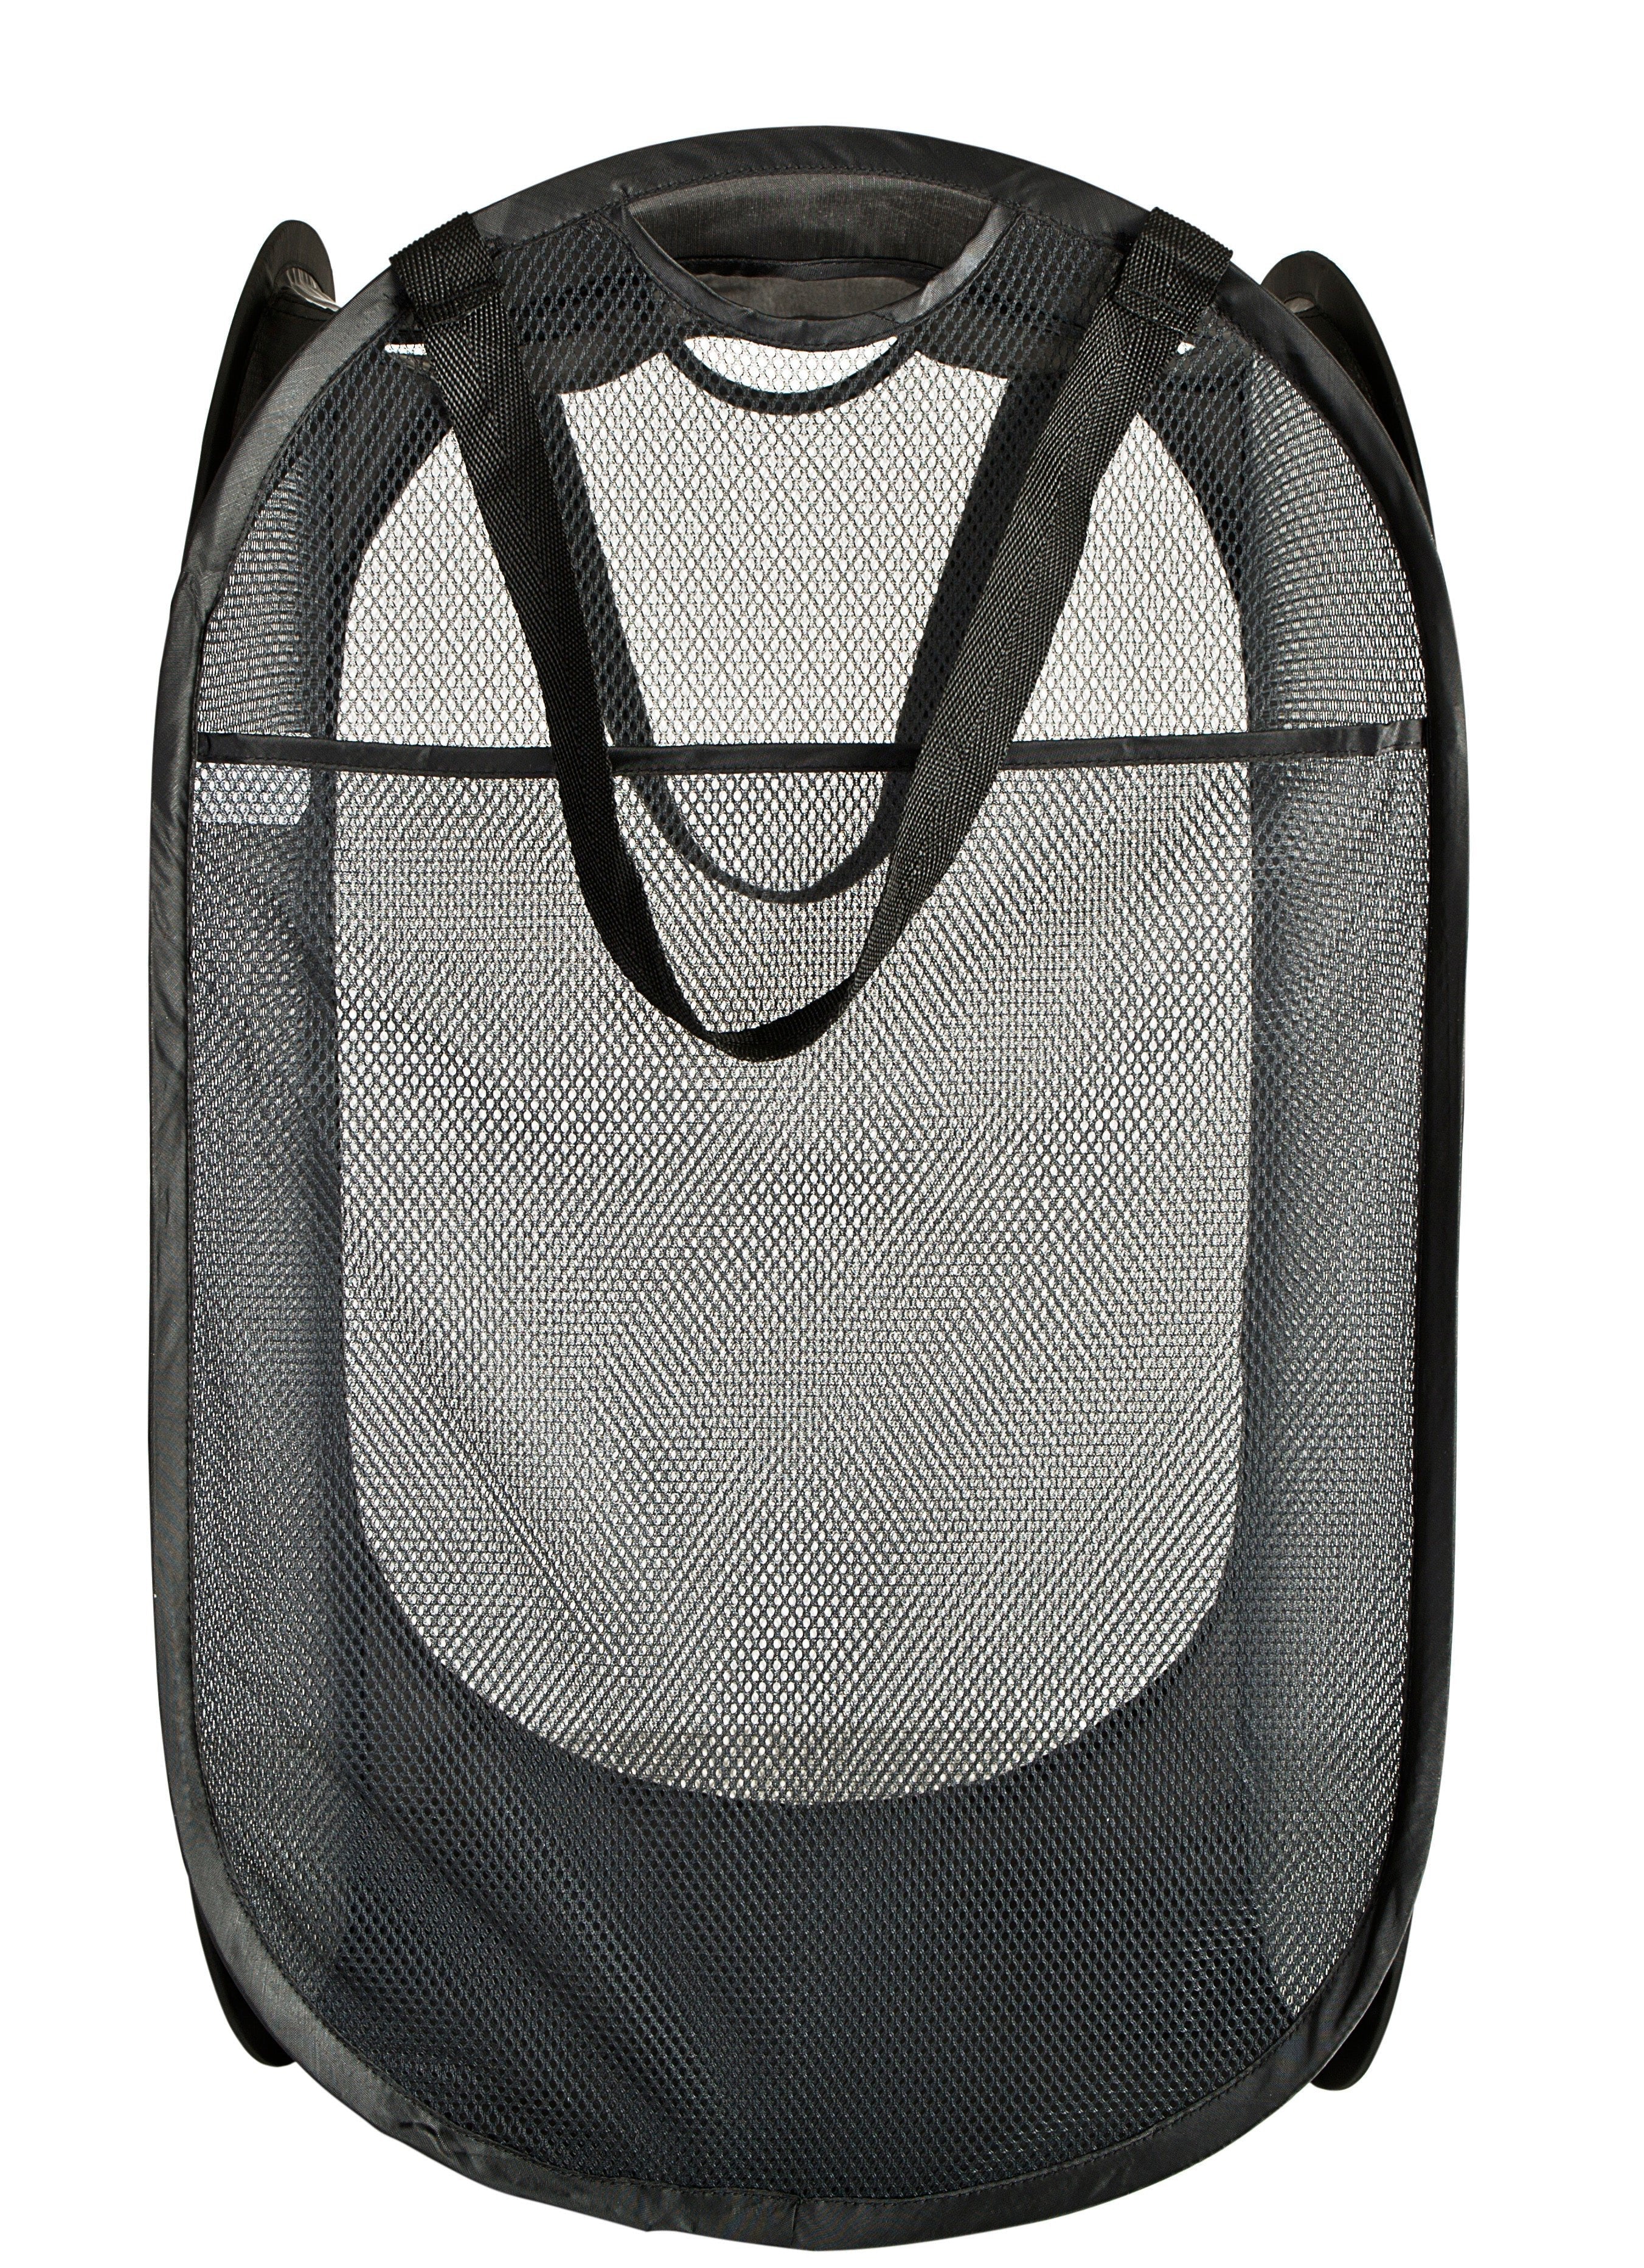 Deluxe Mesh Pop Up Square Laundry Hamper with Side Pocket and Handles - VentilAir Fabric - Collapsible Smart Design® 5